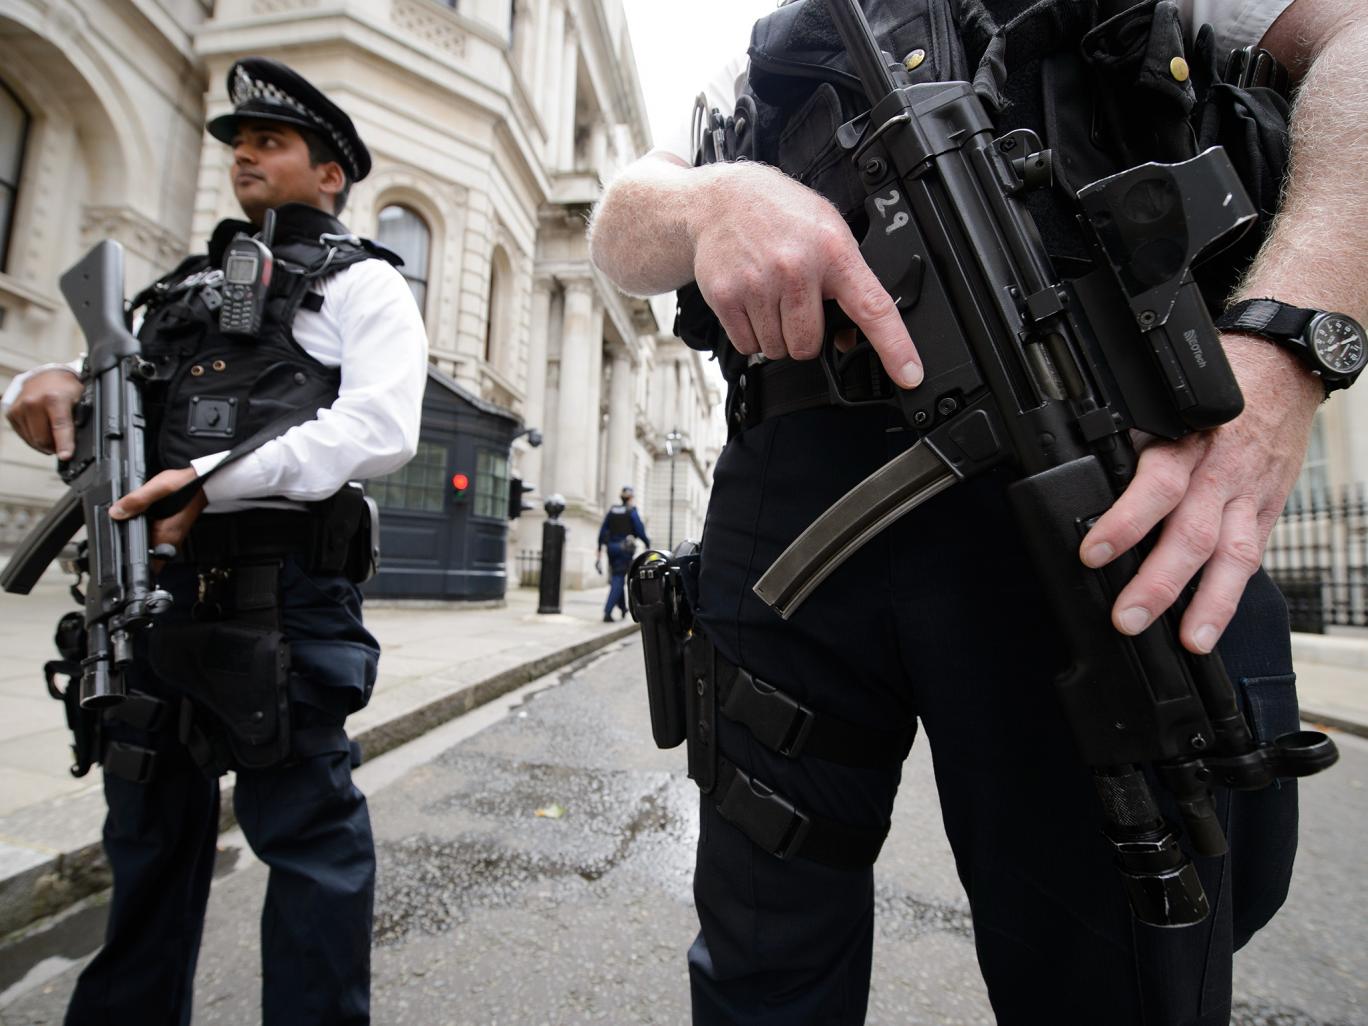 UK risk of terror attack: When, Not If